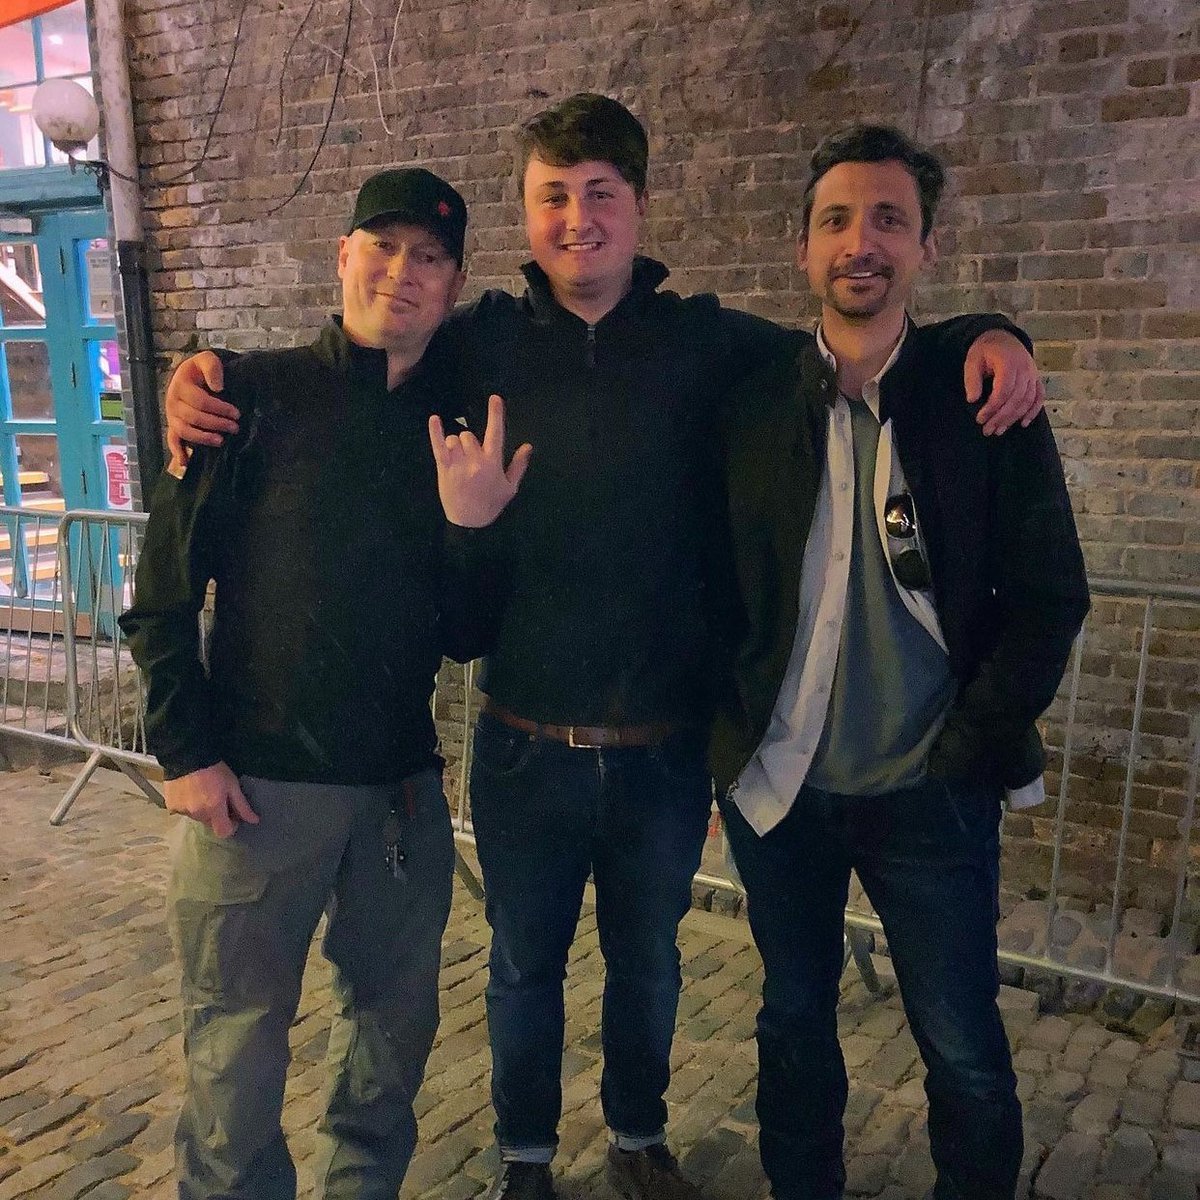 Big thanks to @JulianKindredUK for this photo of Nick, James and Tony down at @Strongroom in June! Great to catch up with friends old and new for the first time in some cases for about 2.5 years! Roll on the next meet-up! . . . . #giraffeaudio #strongroomstudios #music #meetup